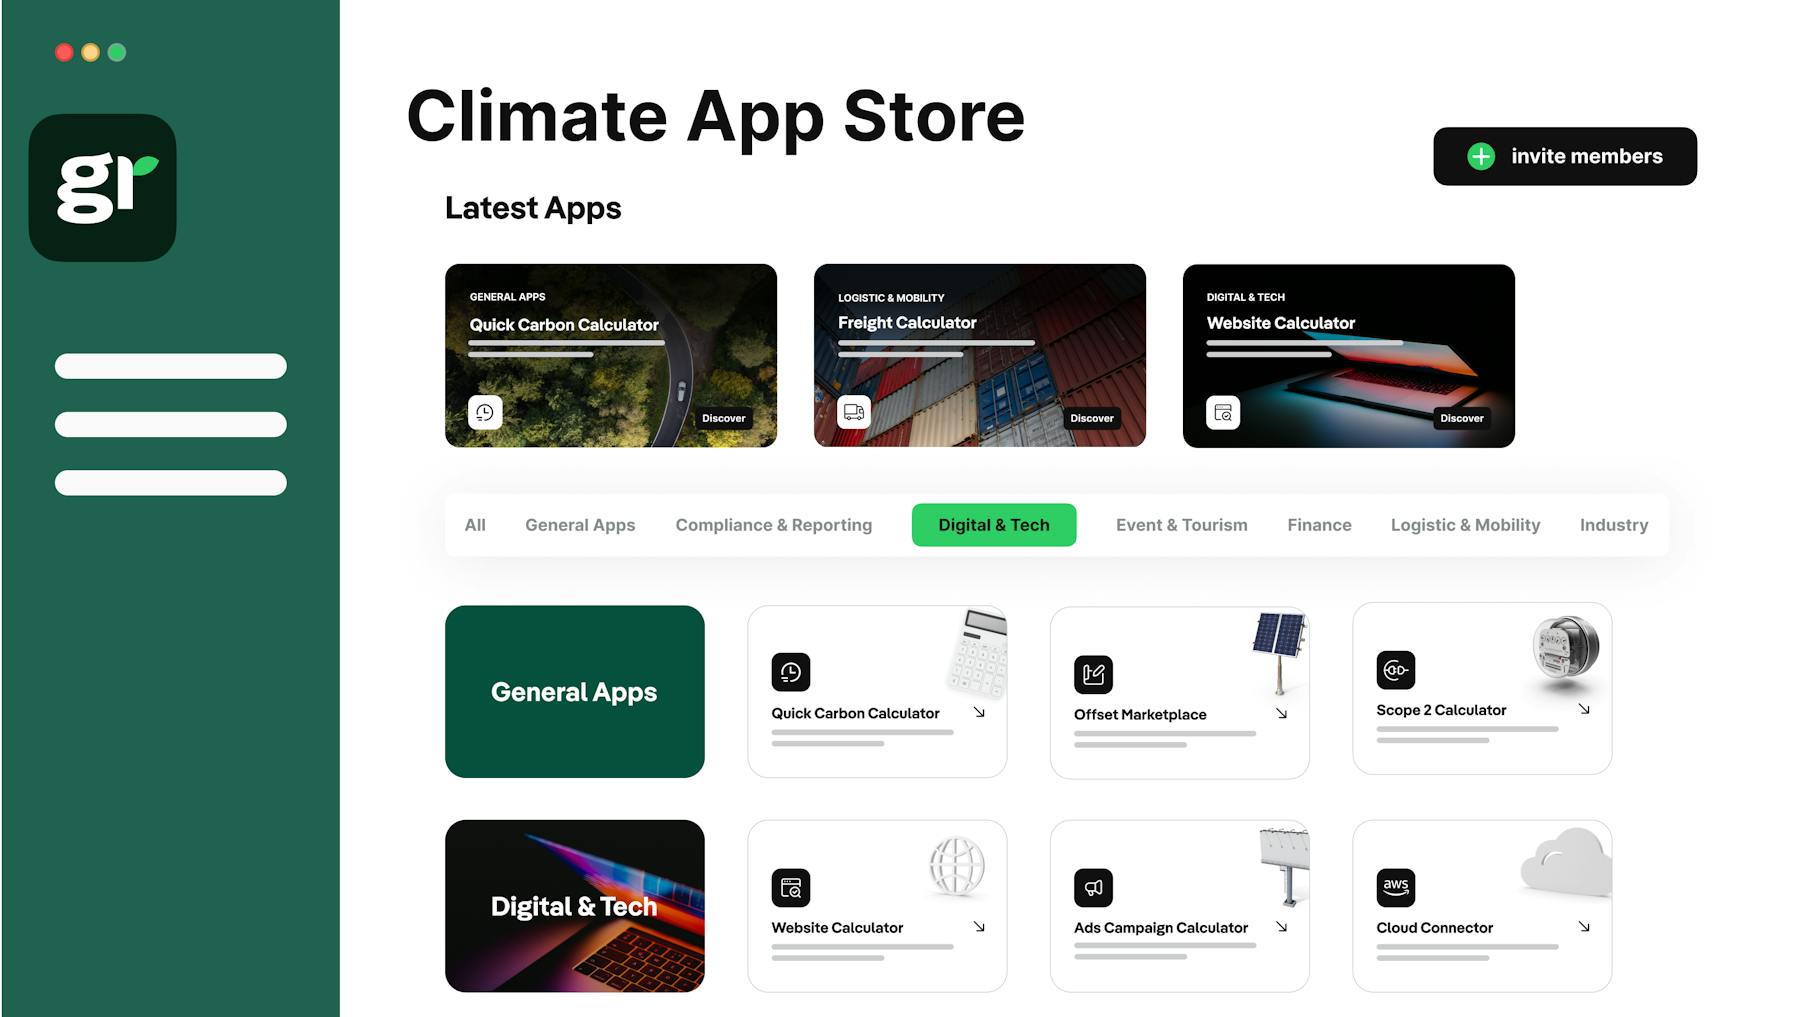 Greenly's climate app store library